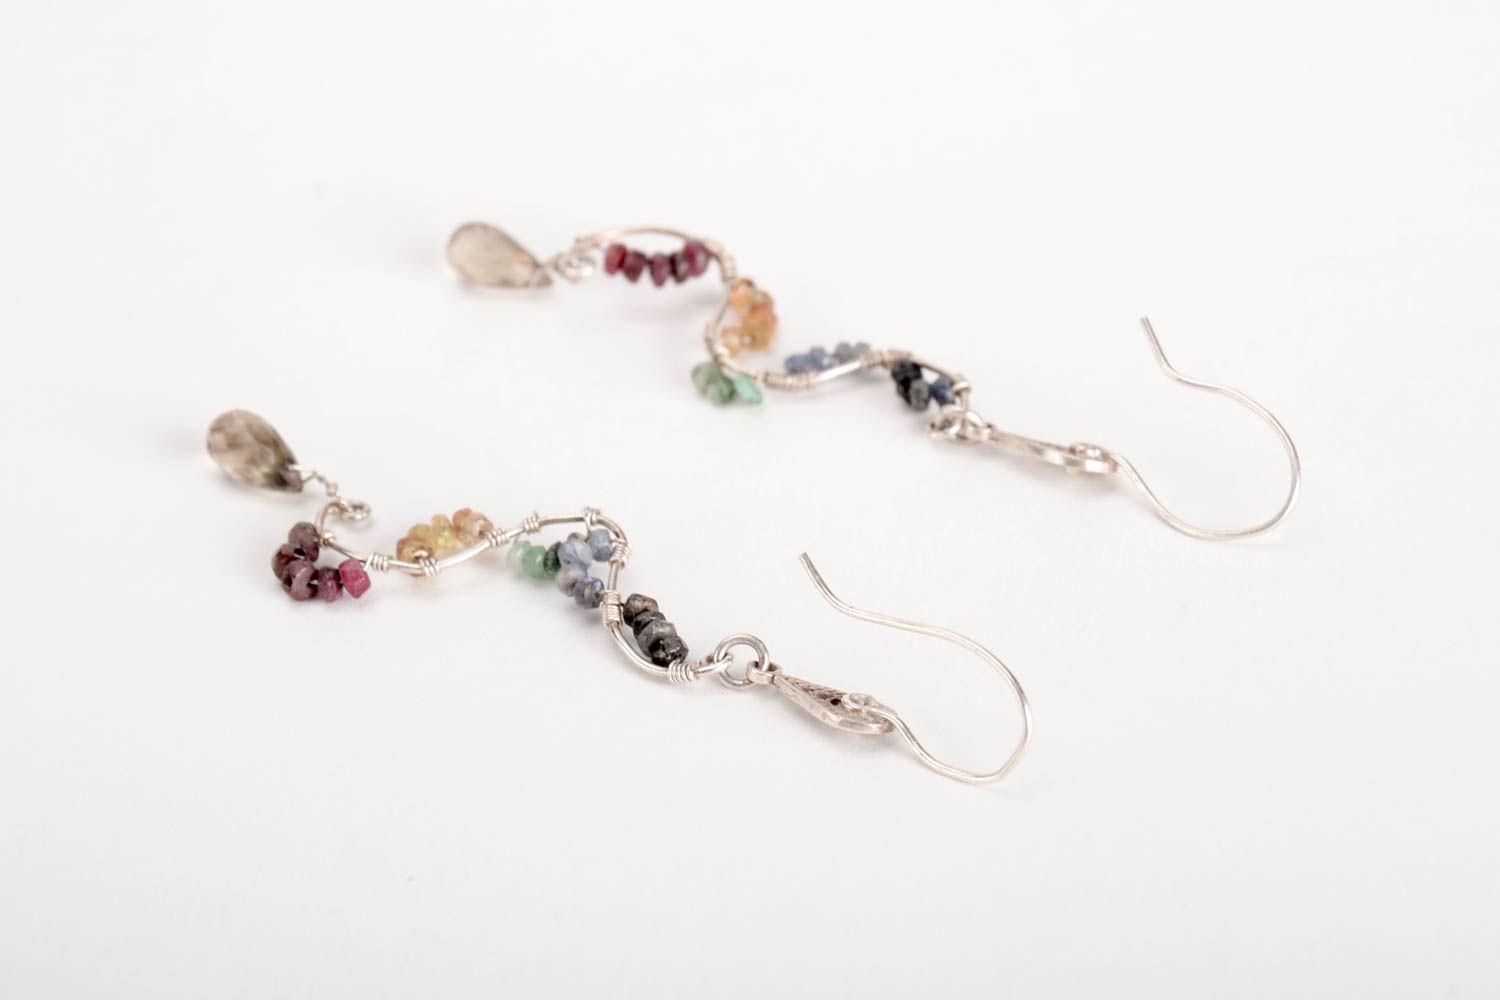 Handmade silver earrings with natural stones unusual luxury present for women photo 4